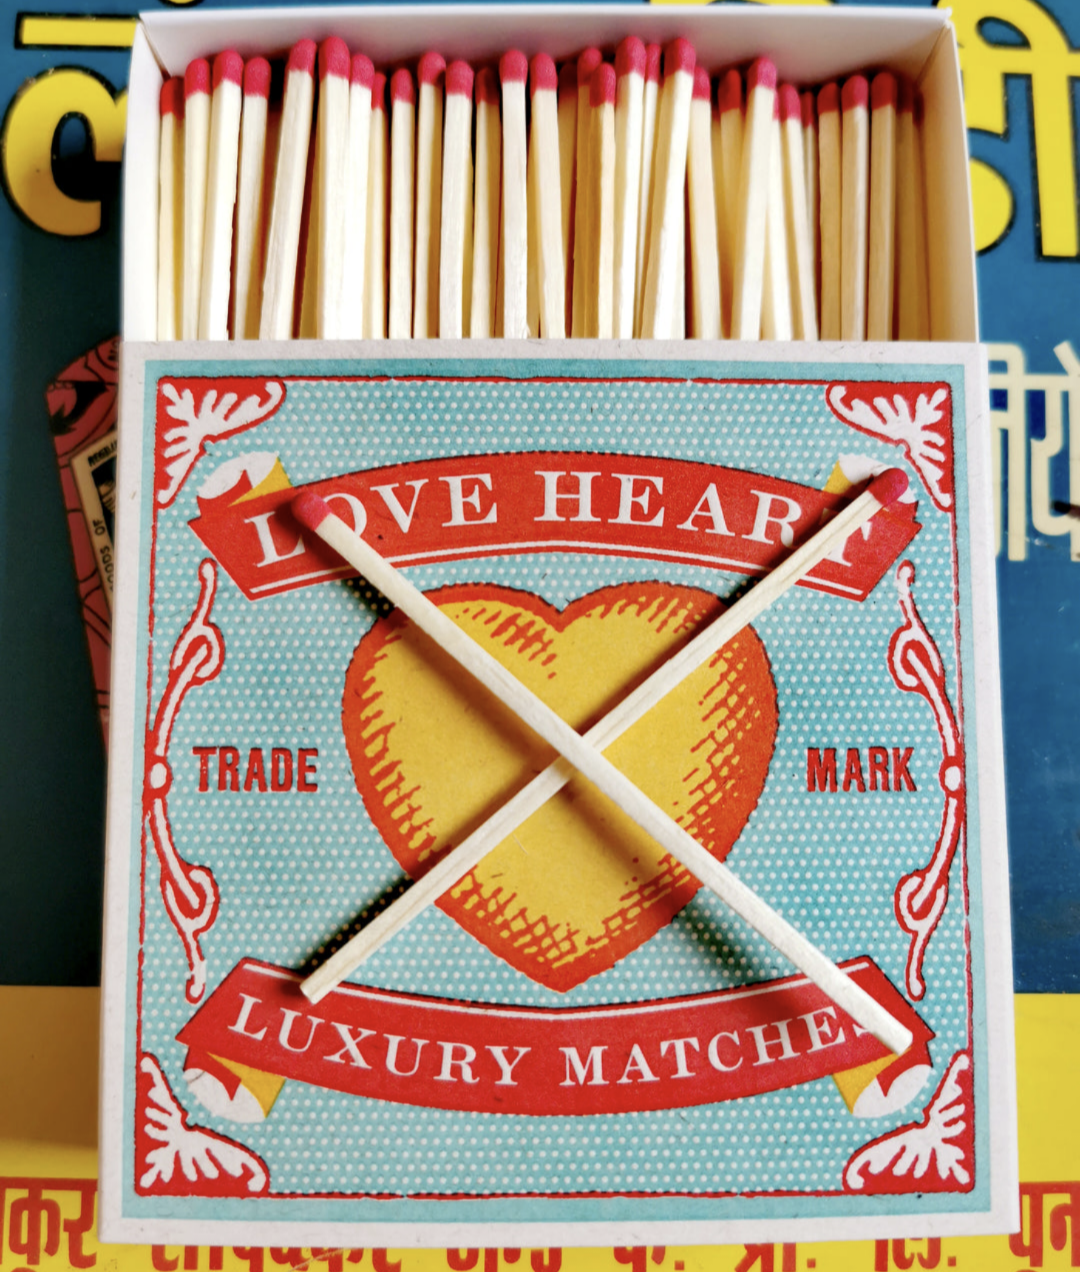 Super luxe matches